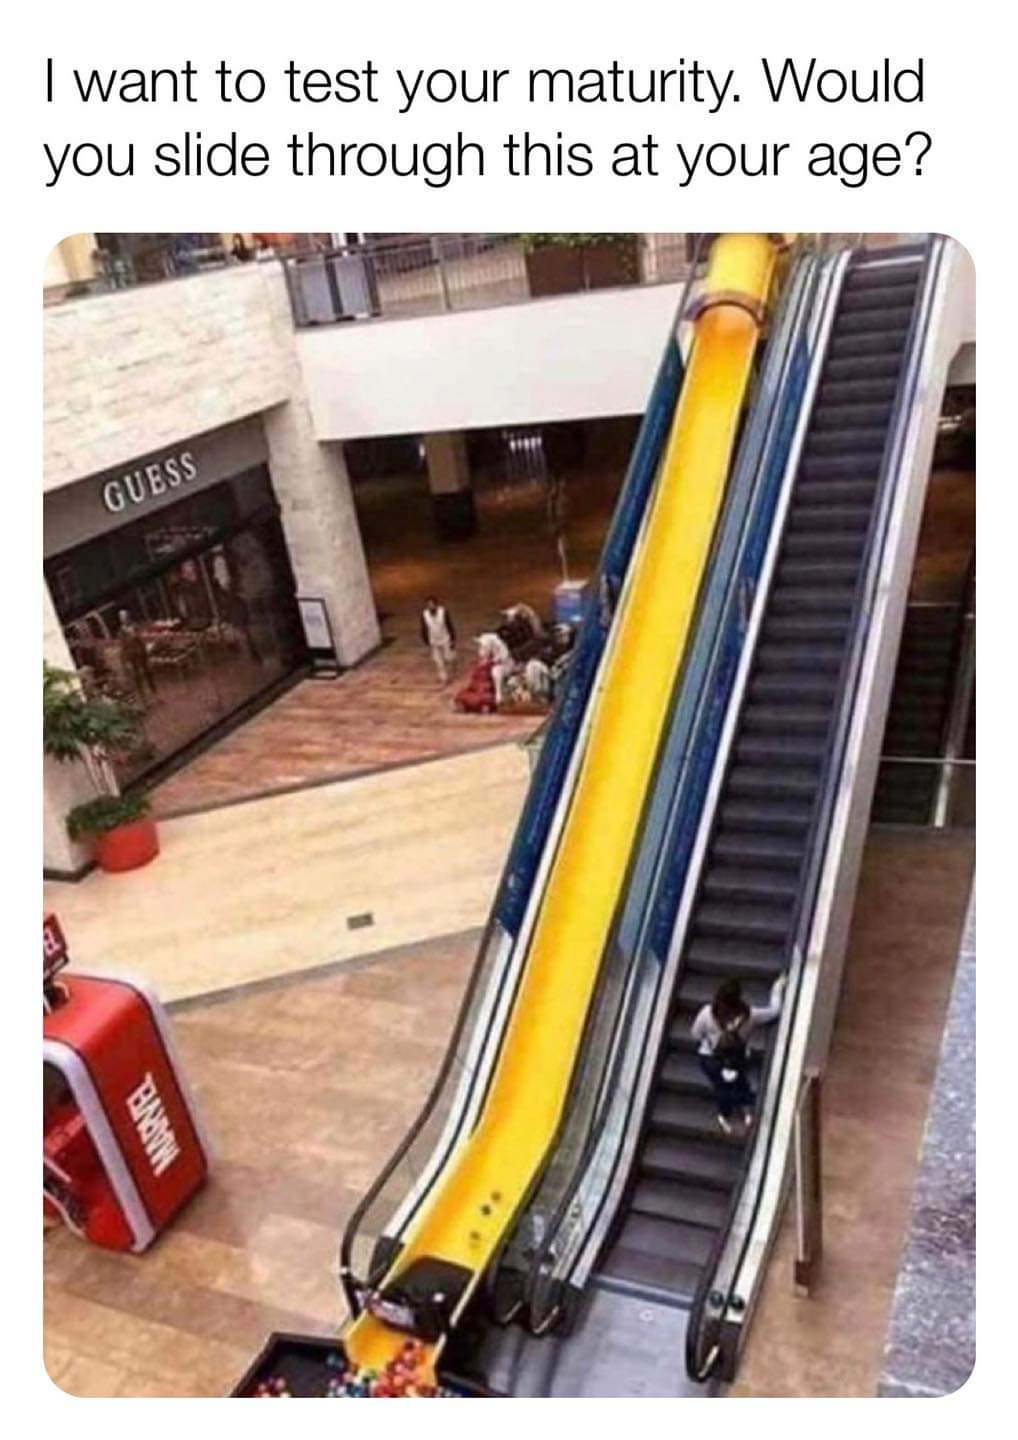 mall with slide and ball pit - I want to test your maturity. Would you slide through this at your age?